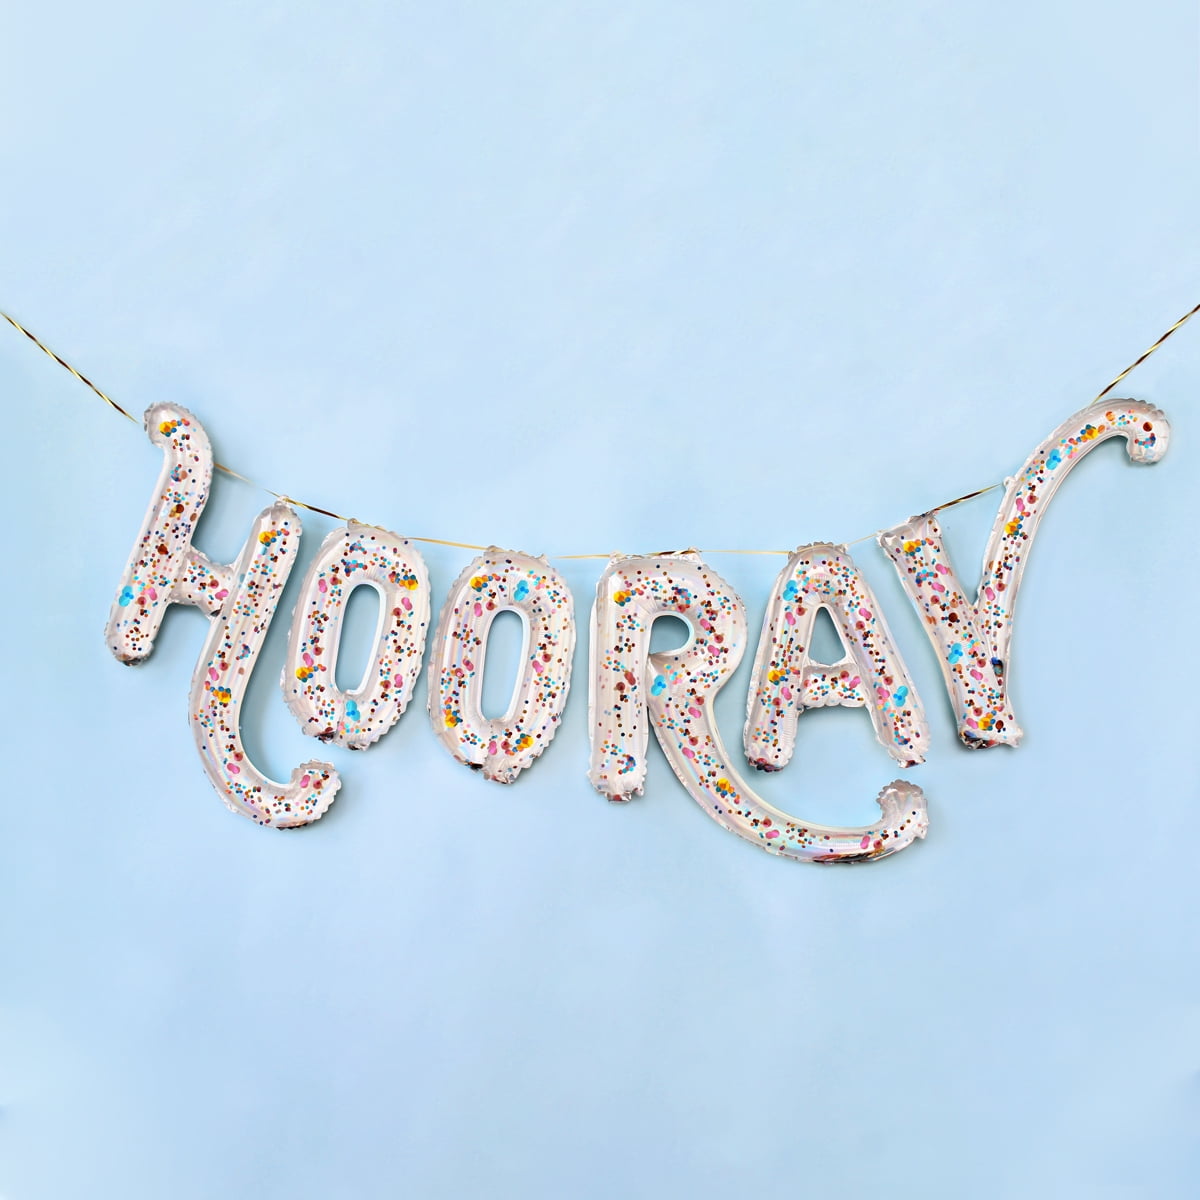 Packed Party 'Cue the Confetti' Multi-Color Confetti-Filled Balloon Banner, 6-Foot, Spells "Hooray"